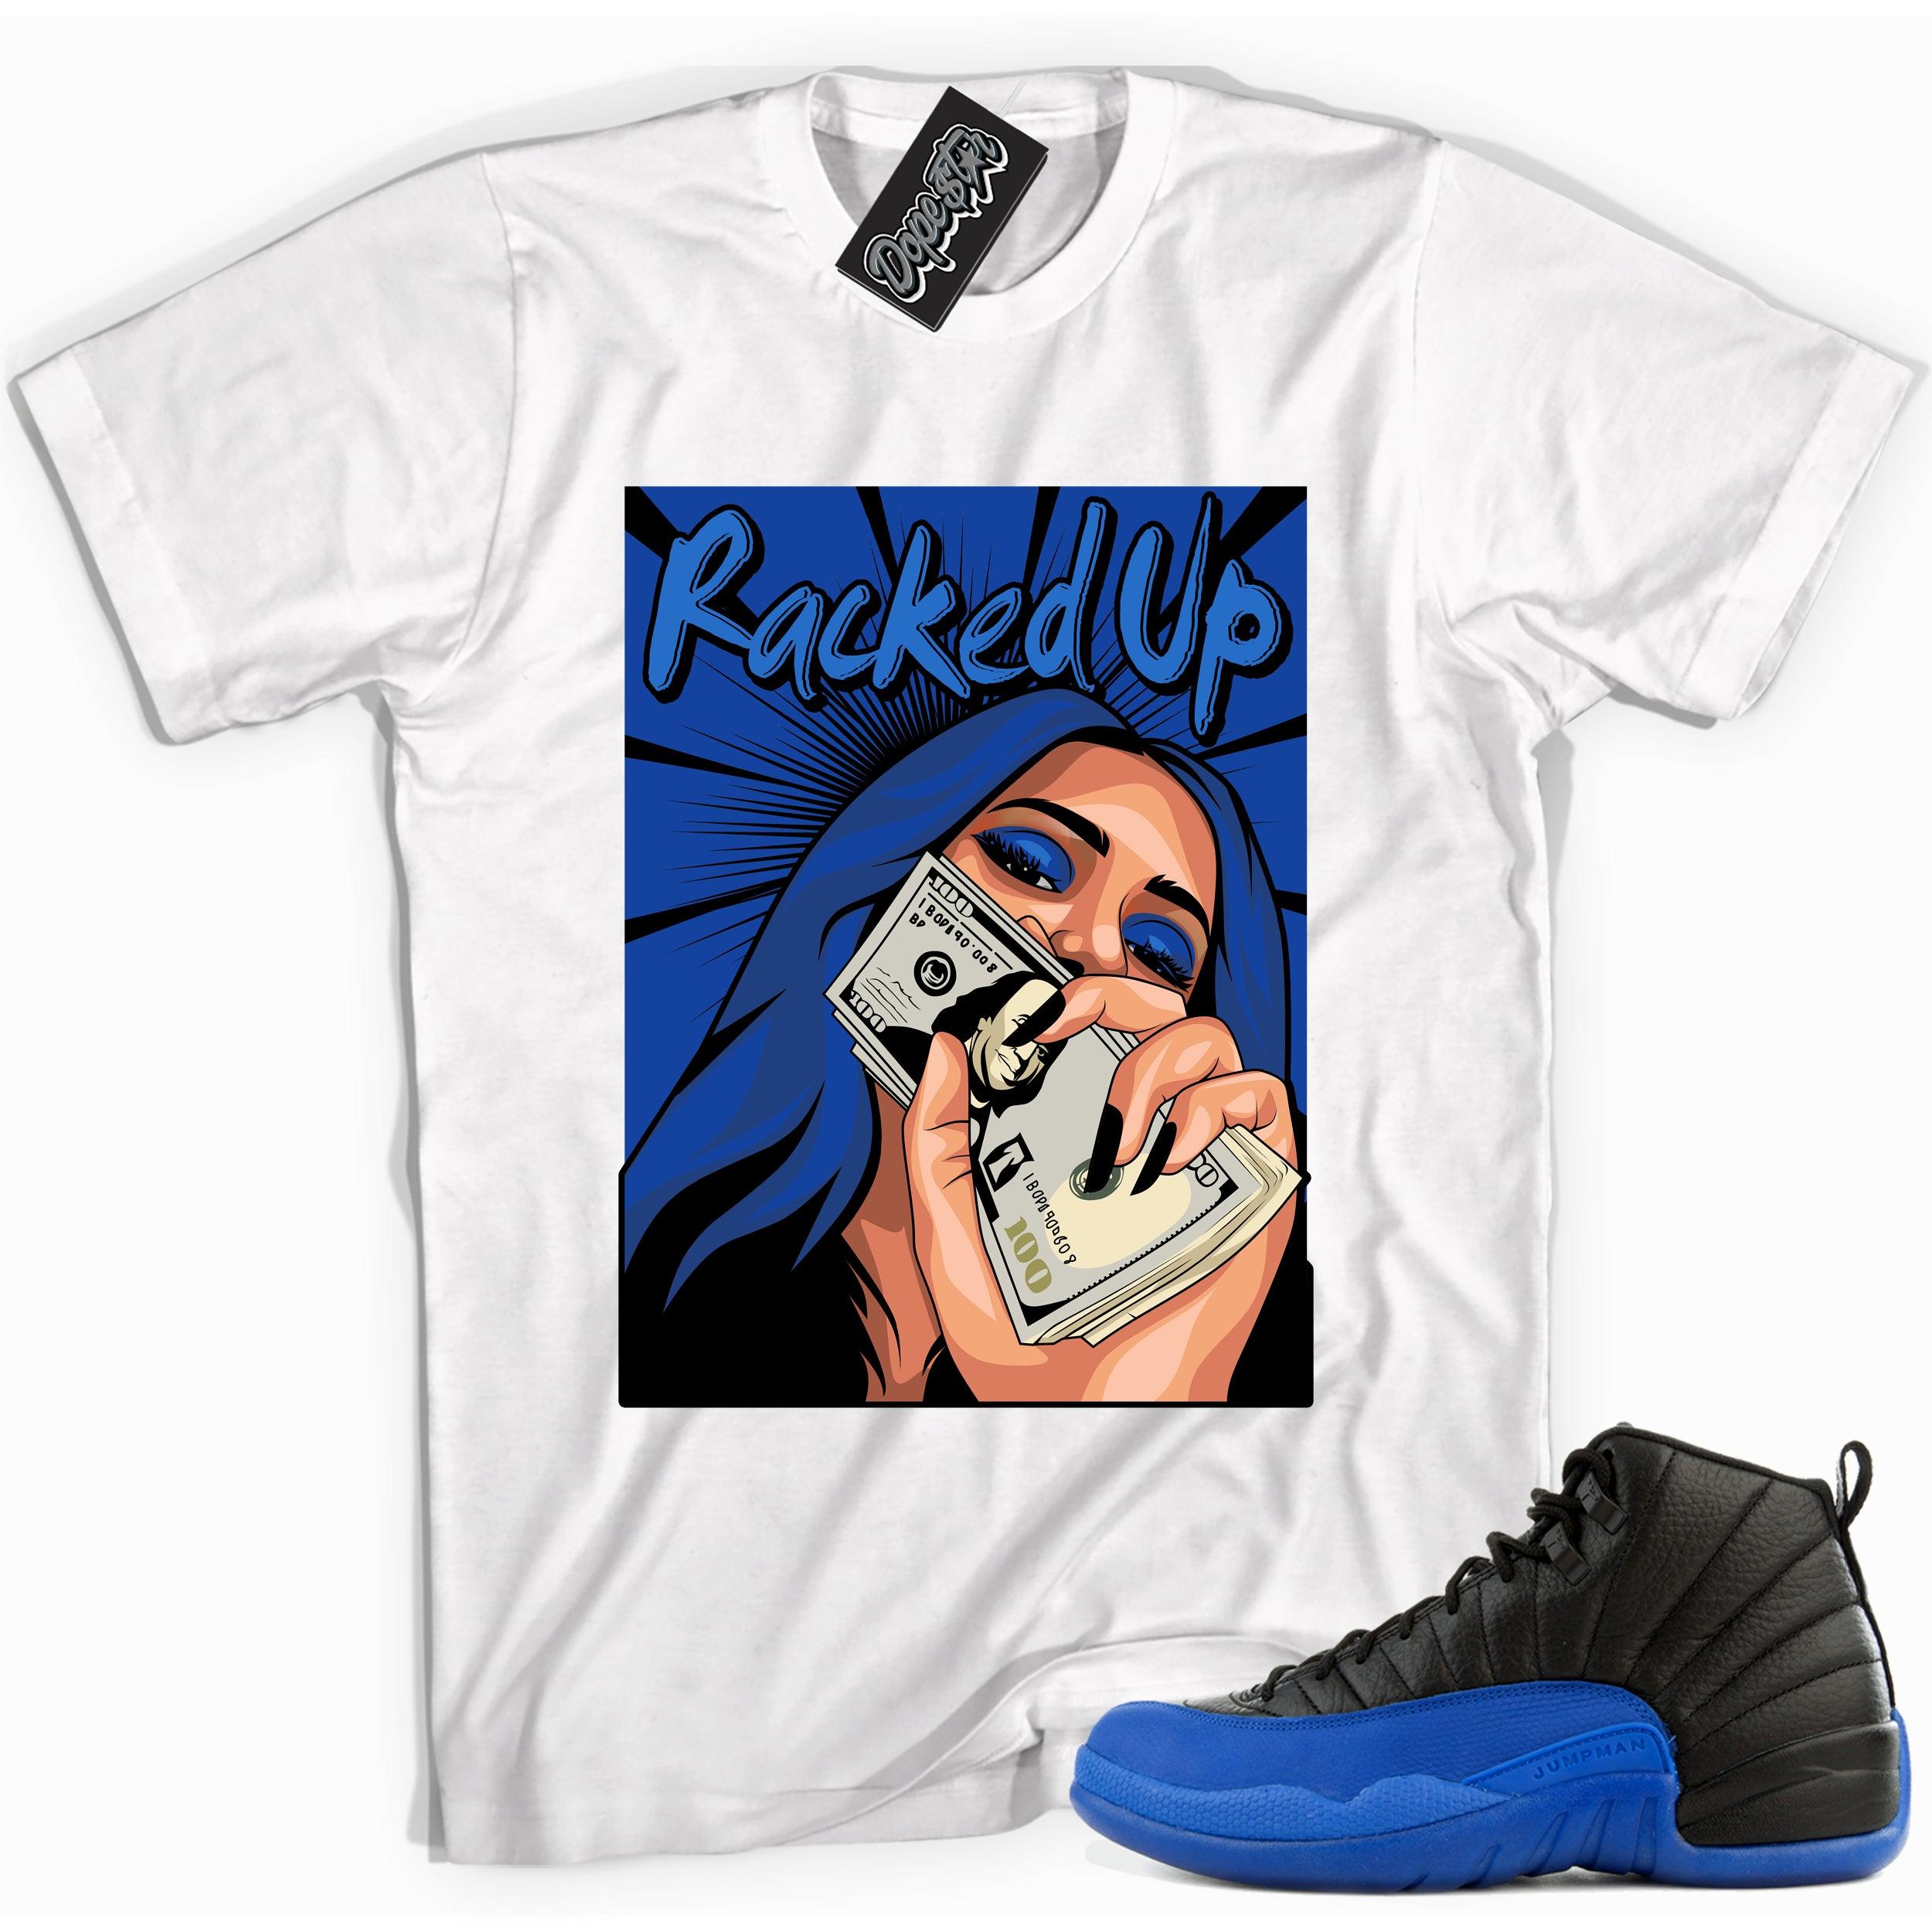 Cool white graphic tee with 'racked up' print, that perfectly matches Air Jordan 12 Retro Black Game Royal sneakers.